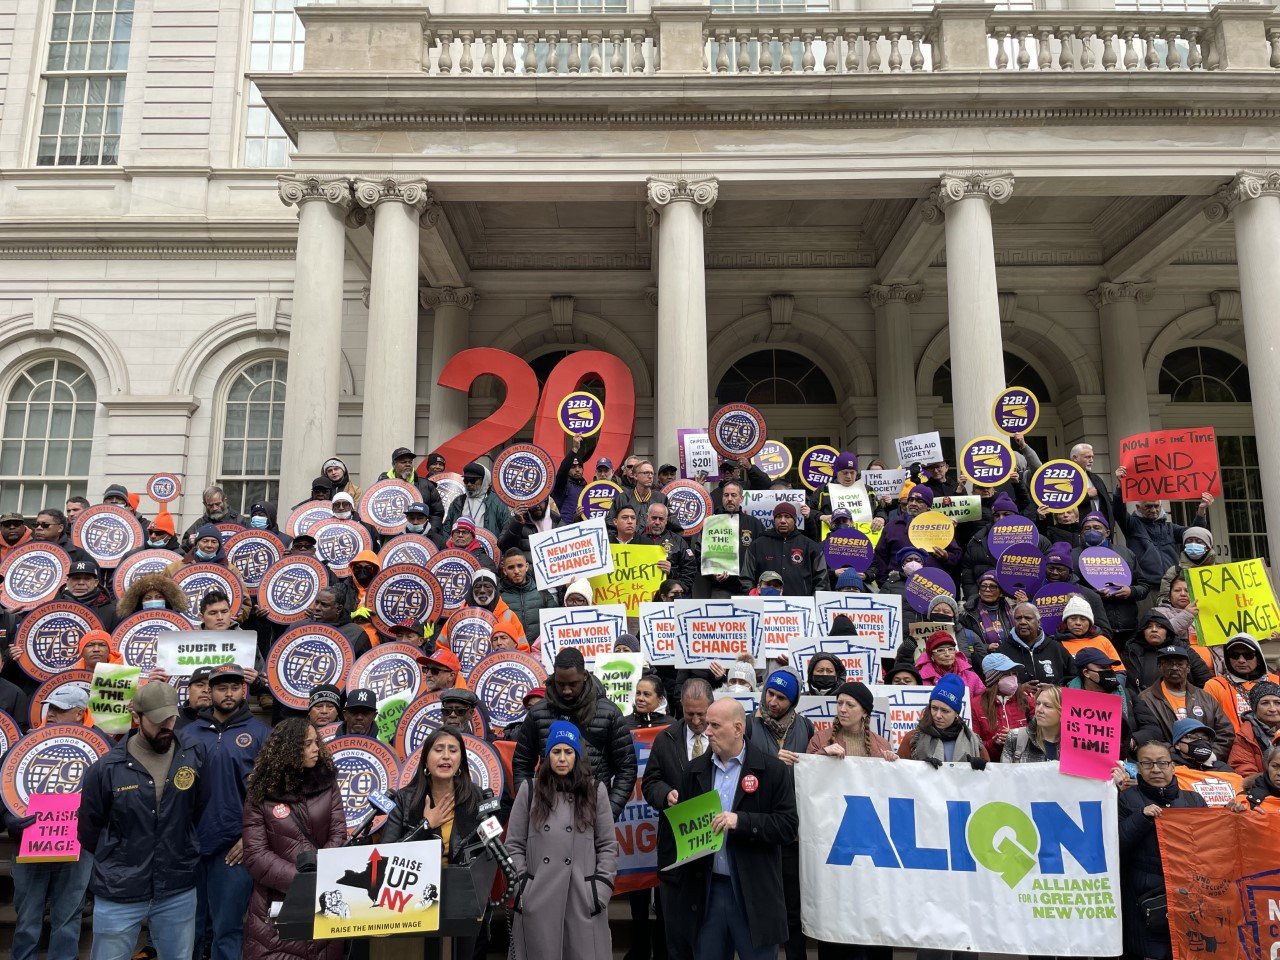 State Senator Jessica Ramos, at the microphone, joined by union leaders, workers and advocates on the City Hall steps Tuesday, announced that she would be introducing legislation to raise the state's and the city's minimum wage.